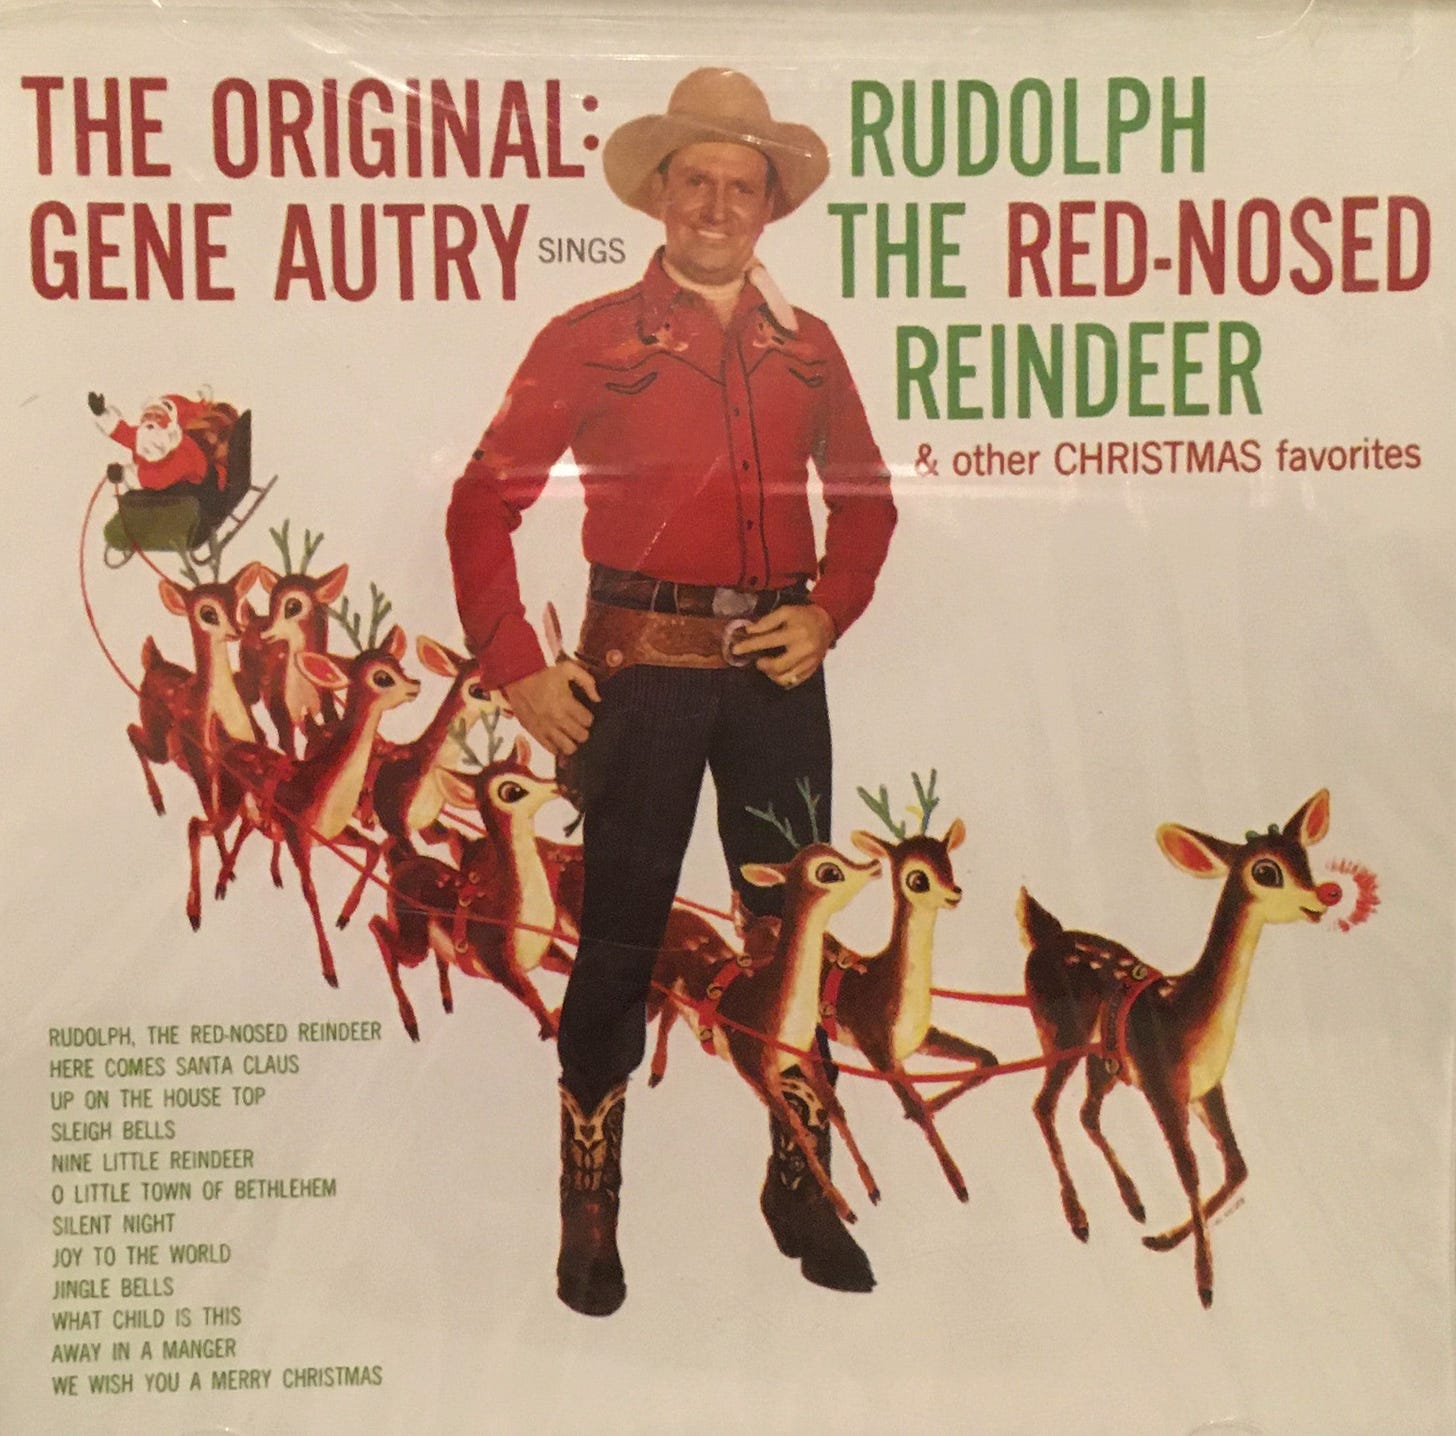 The Original: Gene Autry Sings Rudolph The Red-Nosed Reindeer - OutWest Shop